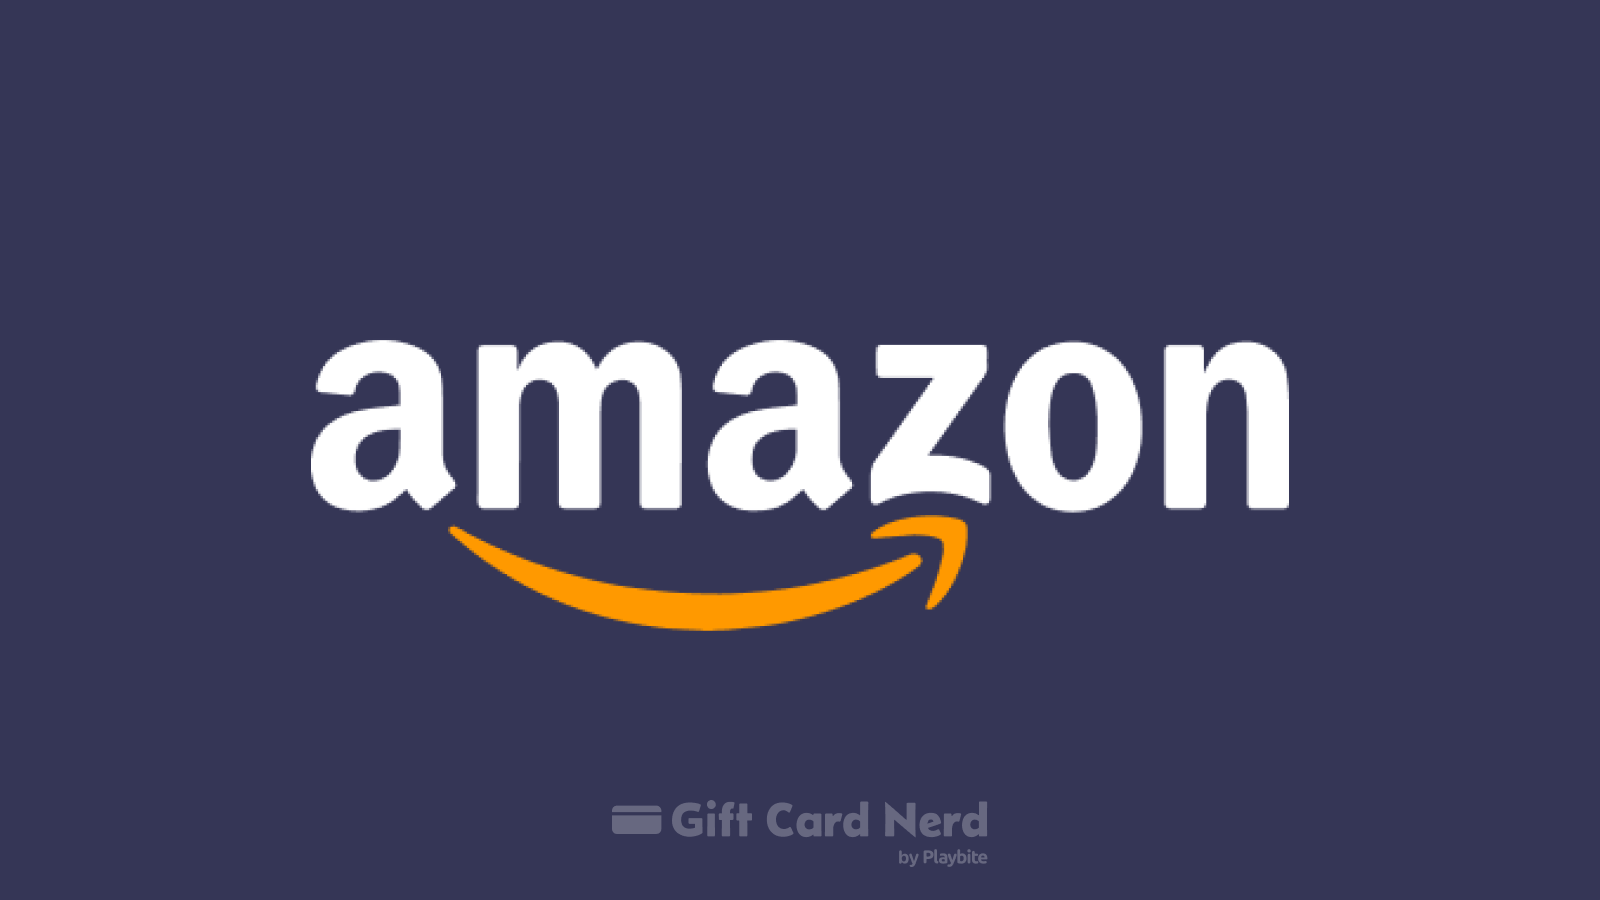 Can I Use an Amazon Gift Card on Cash App?